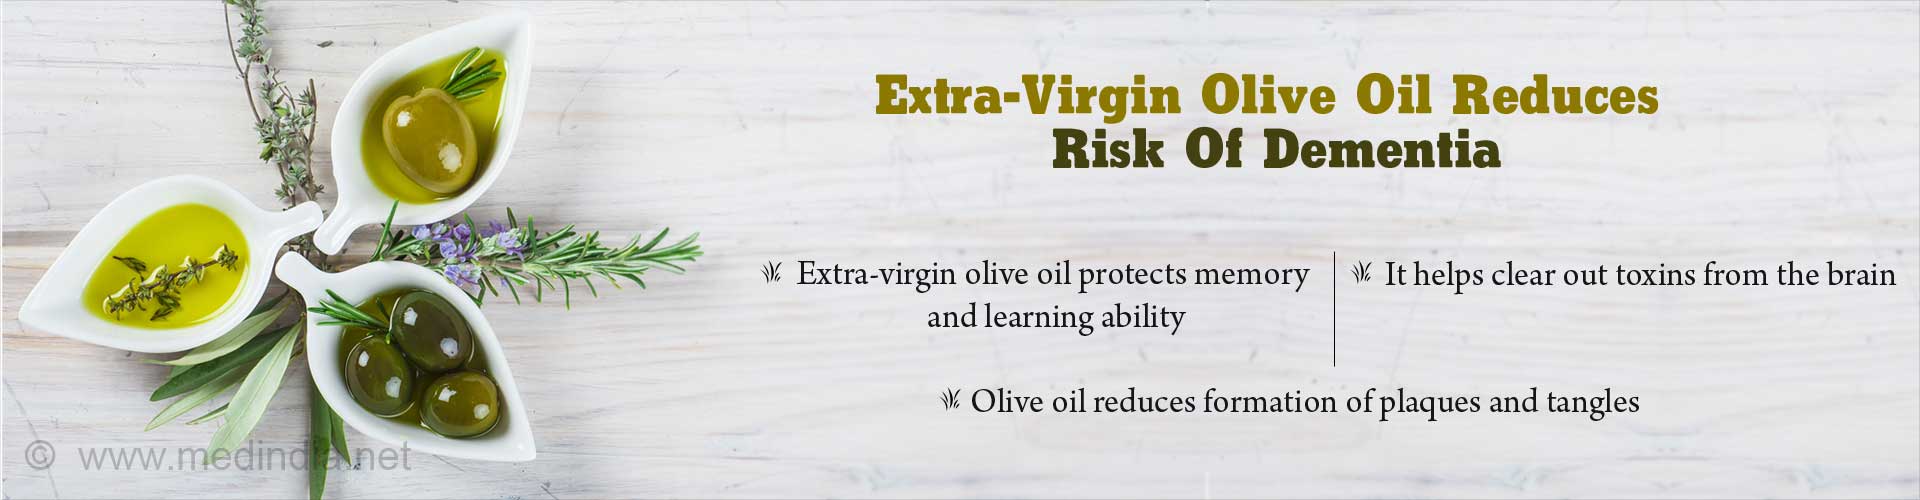 Extra-virgin olive oil reduces risk of dementia
- Extra-virgin olive oil protects memory and learning ability
- It helps out toxins from the brain
- Olive oil reduces formation of plaques and tangles